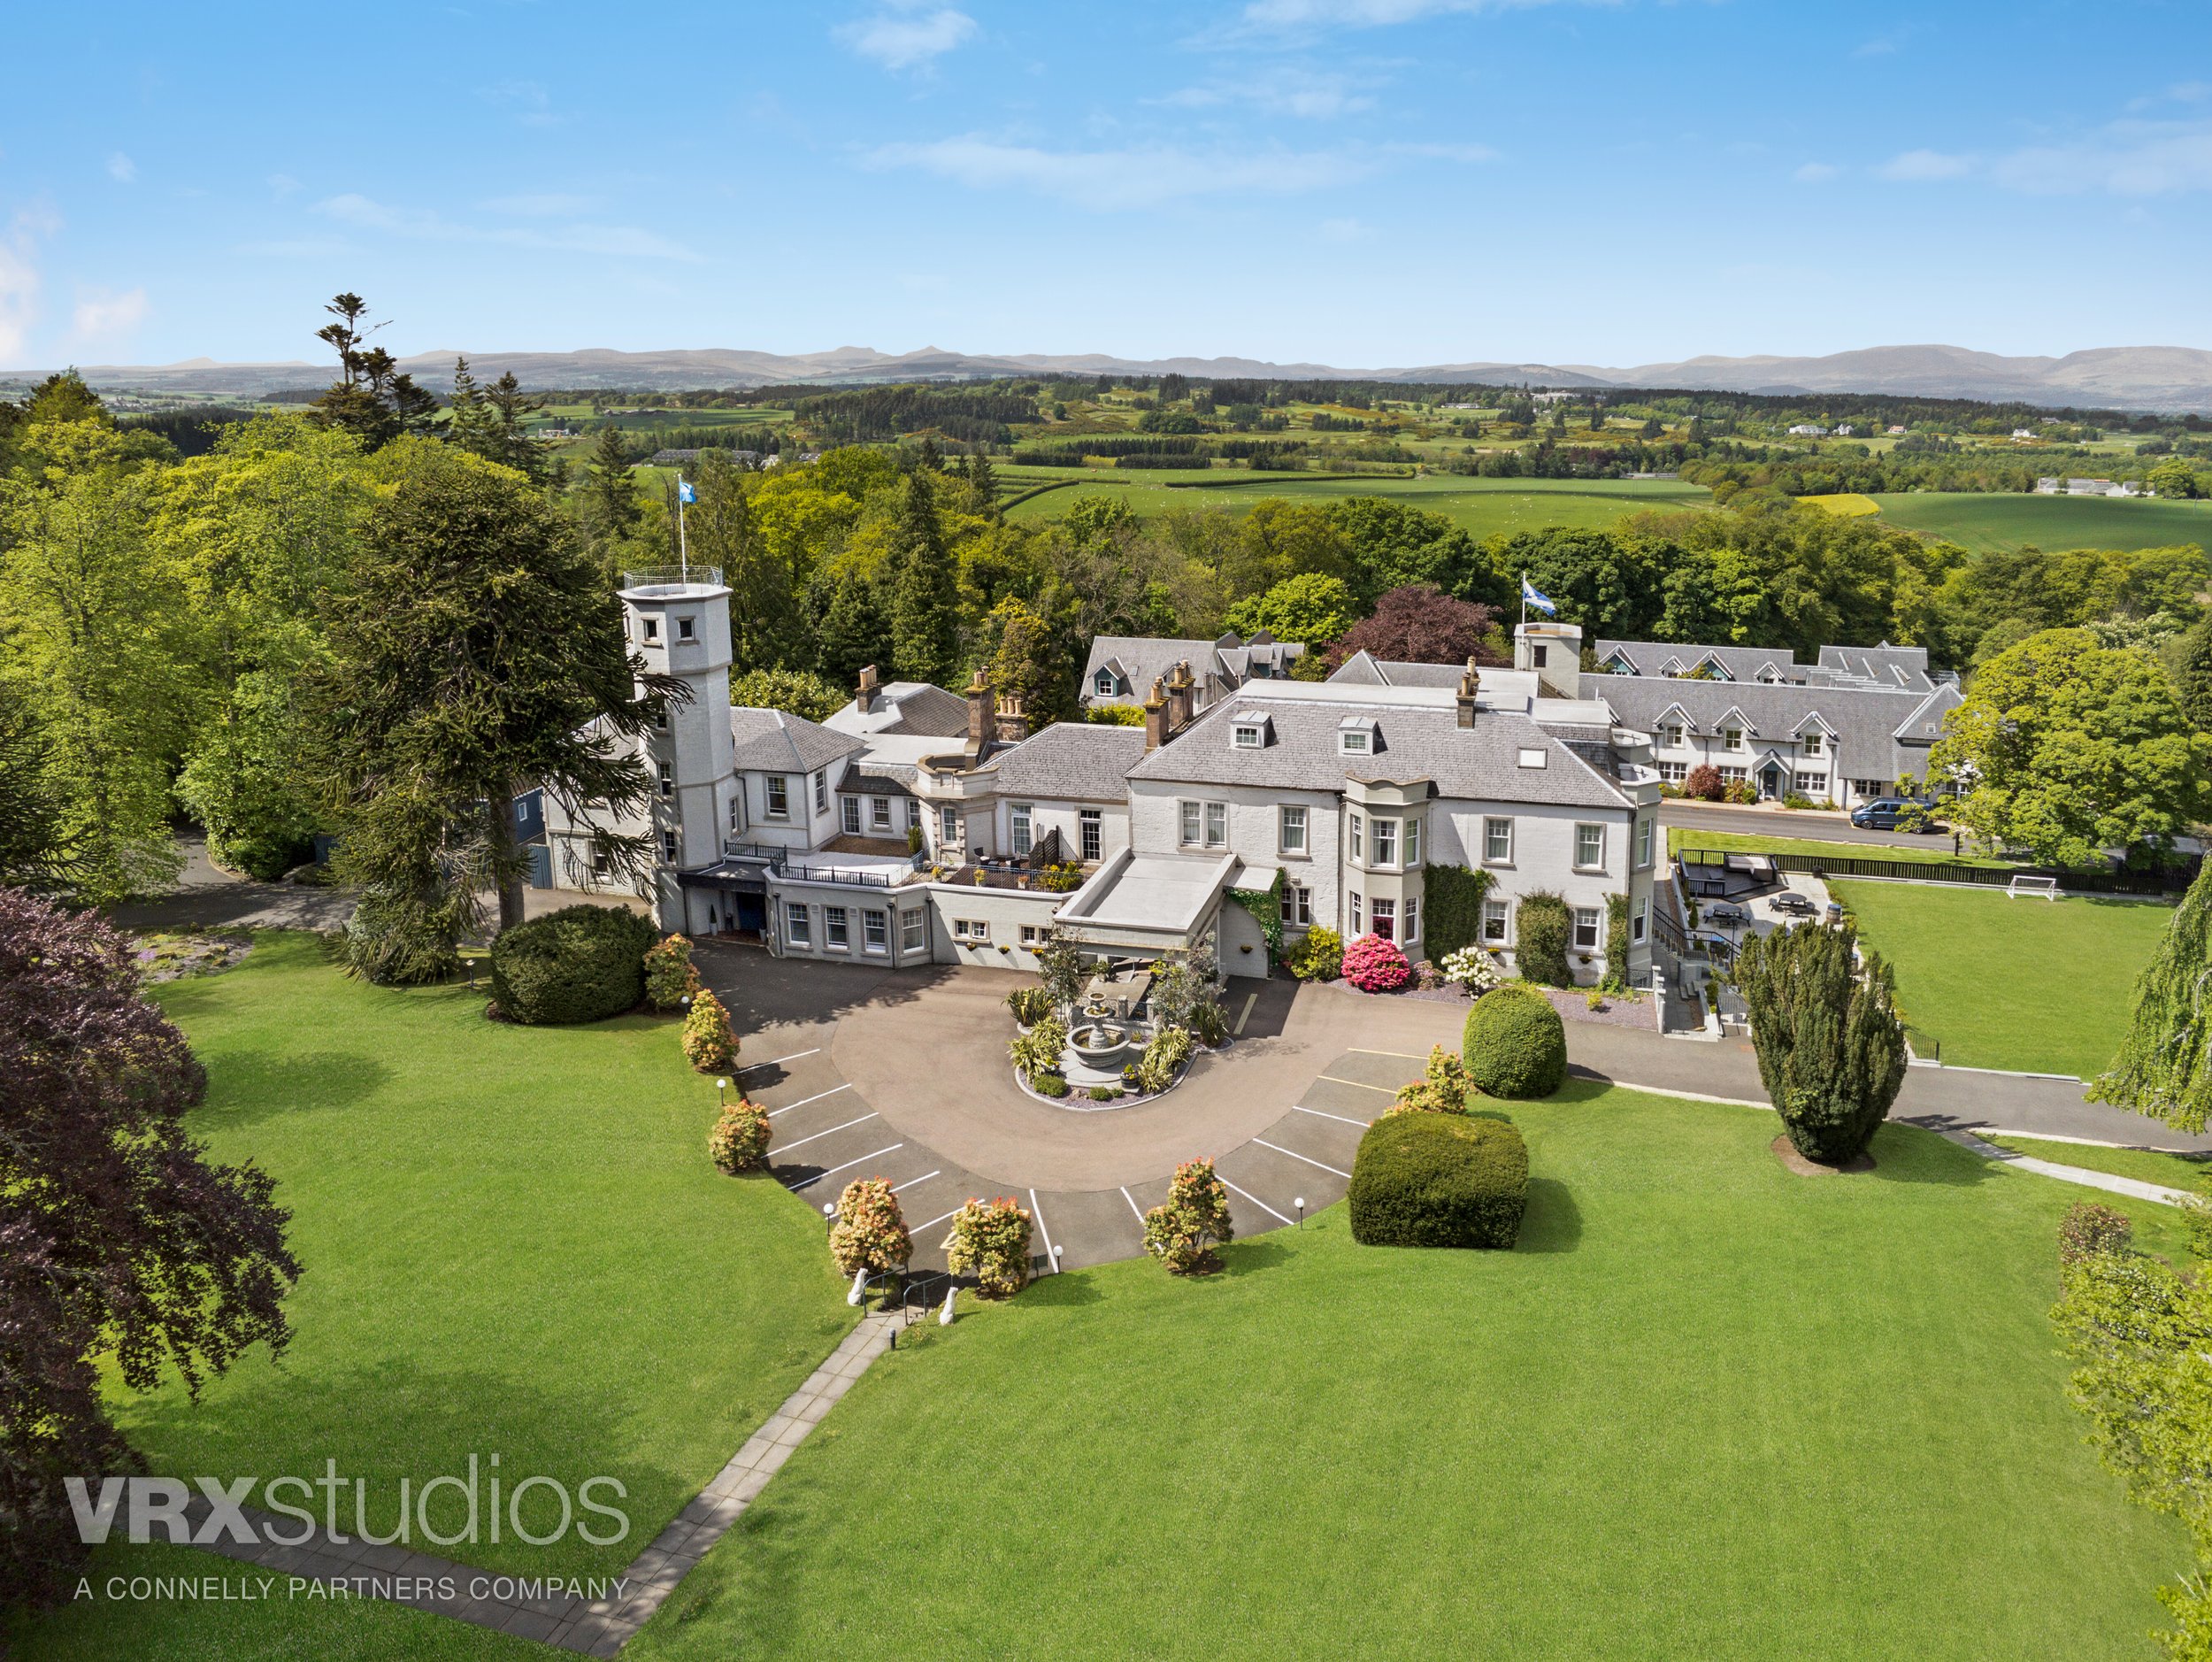 Client: VRX Studios • Project: Wyndham Duchally Country Estate, Scotland • Photographer: Marcelo Barbosa • Produced by: VRX Studios 22/05/2022